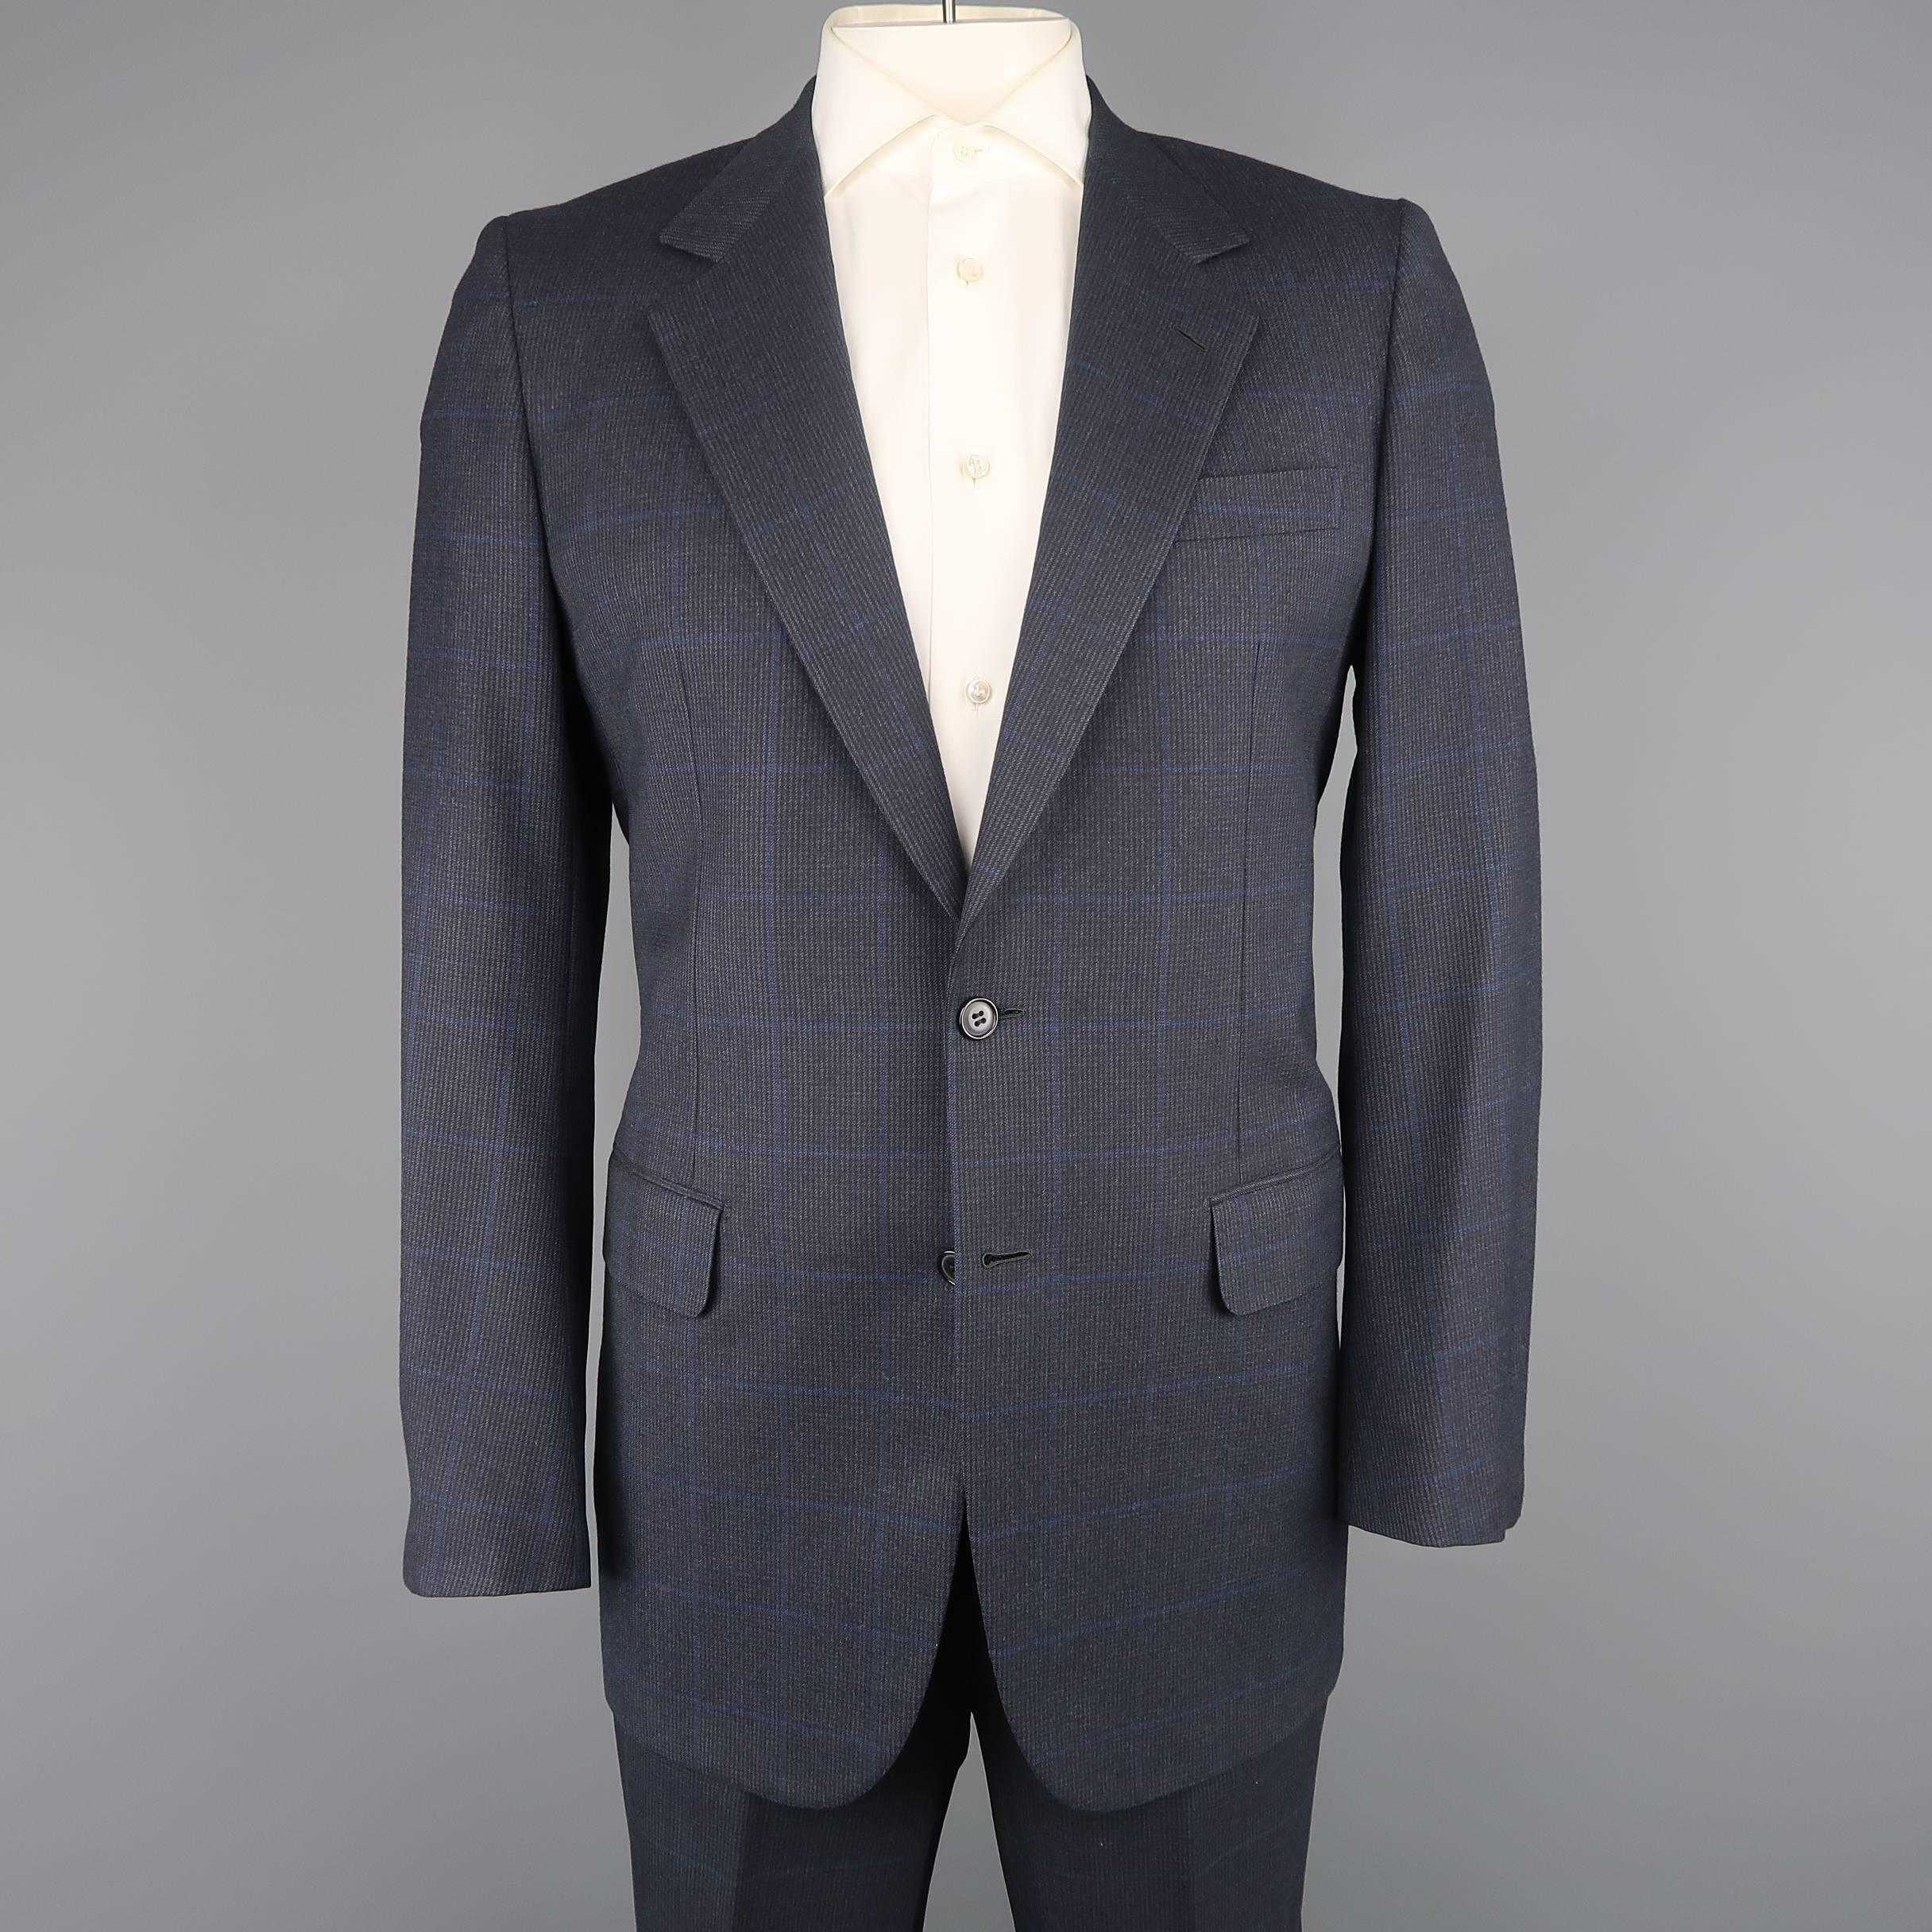 Vintage BRIONI two piece suit comes in navy blue glenplaid wool and includes a single breasted, two button sport coat and pleated trousers. Made in Italy.
 
Good Pre-Owned Condition.
Marked: IT 50
 
Measurements:
 
Jacket
Shoulder: 17 in.
Chest: 42